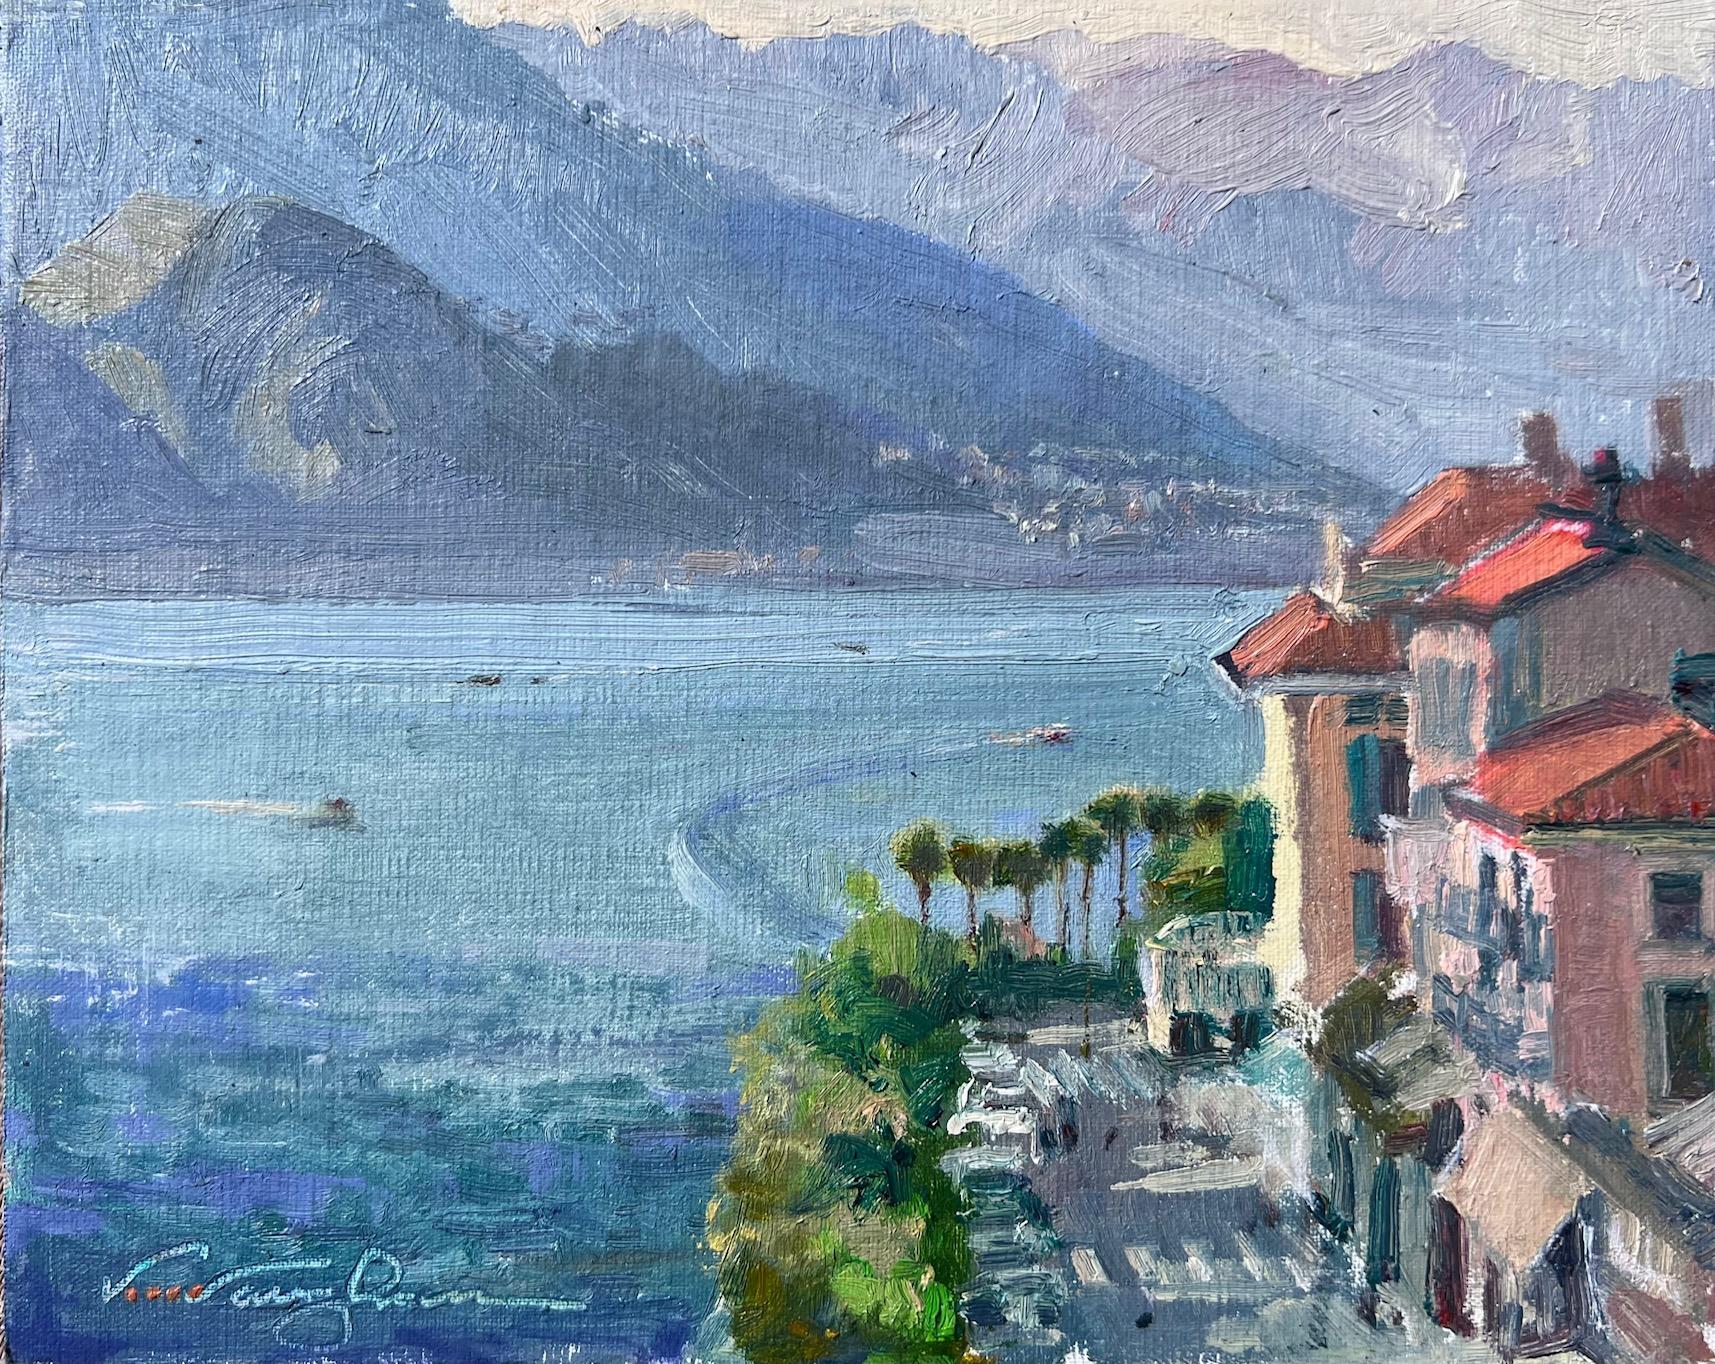  BEST VIEWED ON MOBILE DEVICE LOOK FOR FREE SHIPPING AT CHECK OUT FRAMED
 Listed are three paintings that are sold as a group.  These are all taken from the sketches compile by Virginia Vaughan on a recent trip to Italy. The size is listed as the